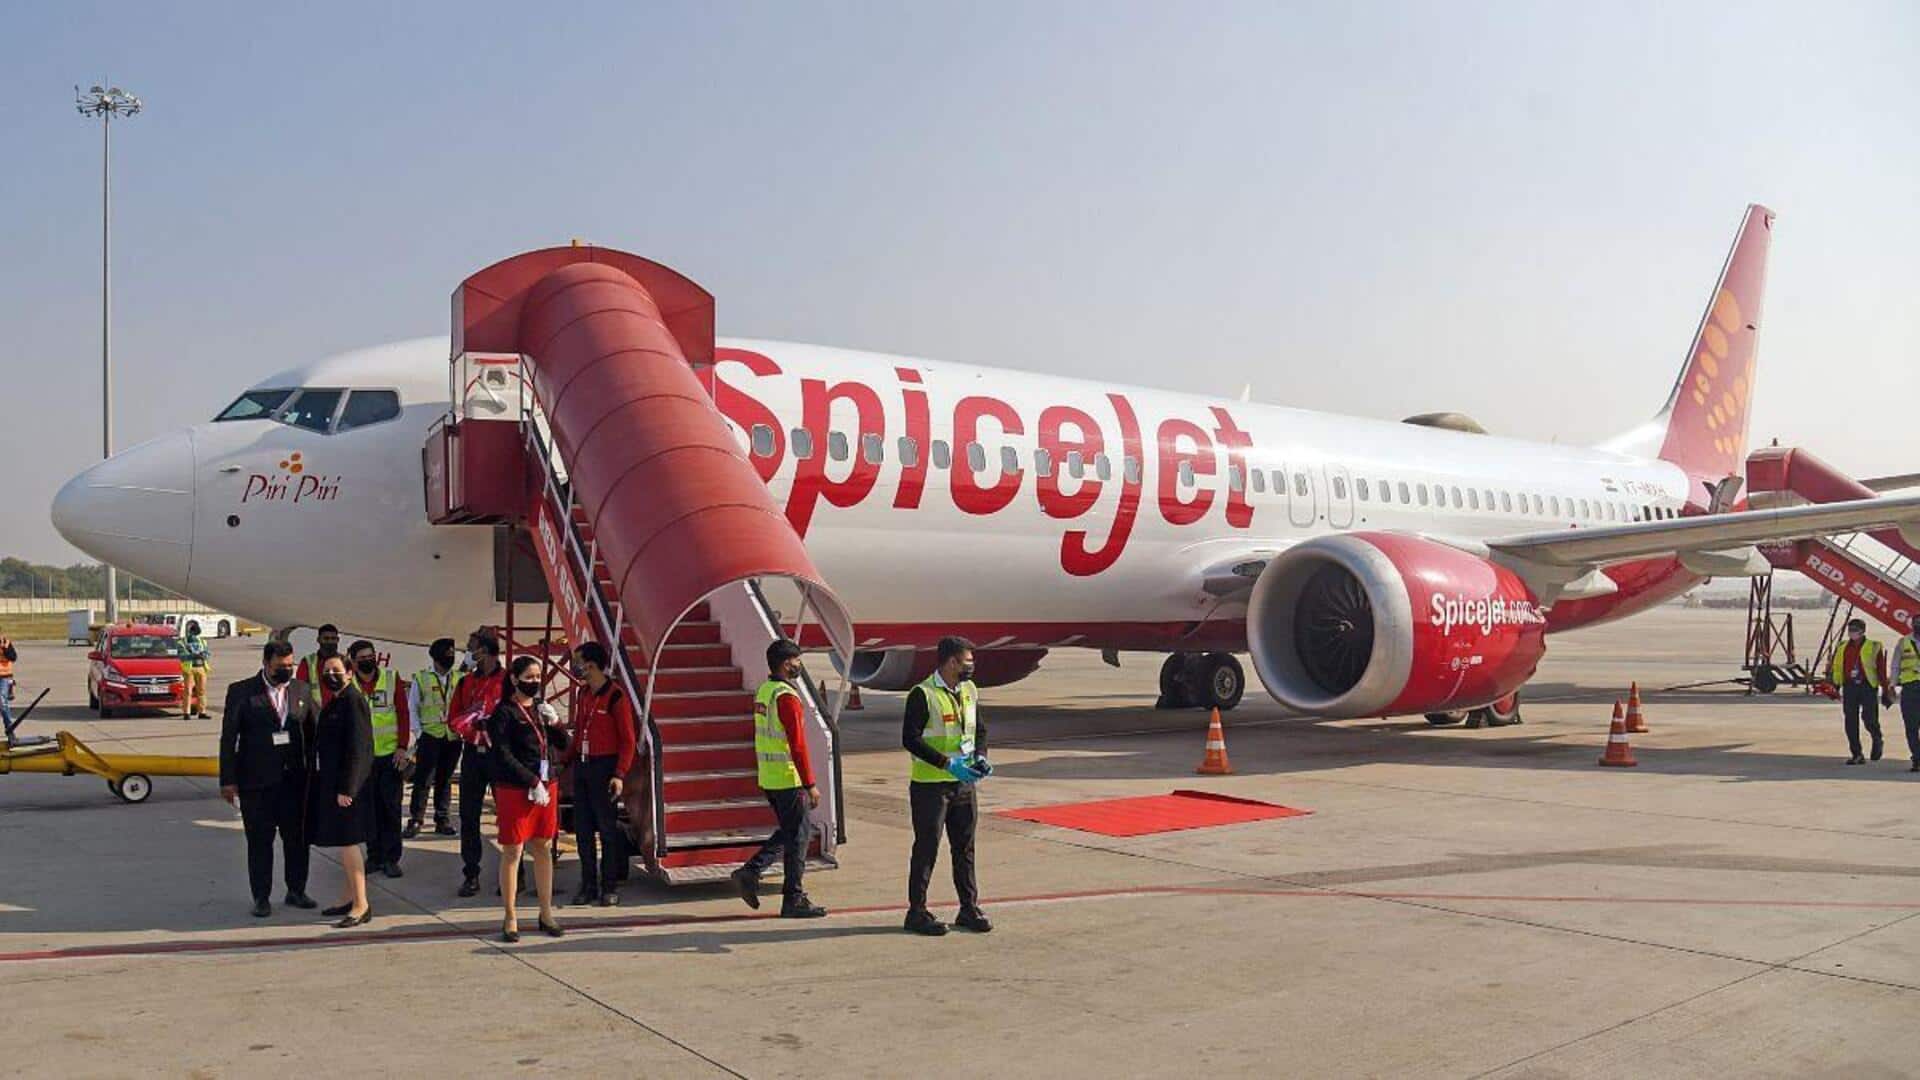 Cash-strapped SpiceJet to fire 1,400 employees to reduce costs